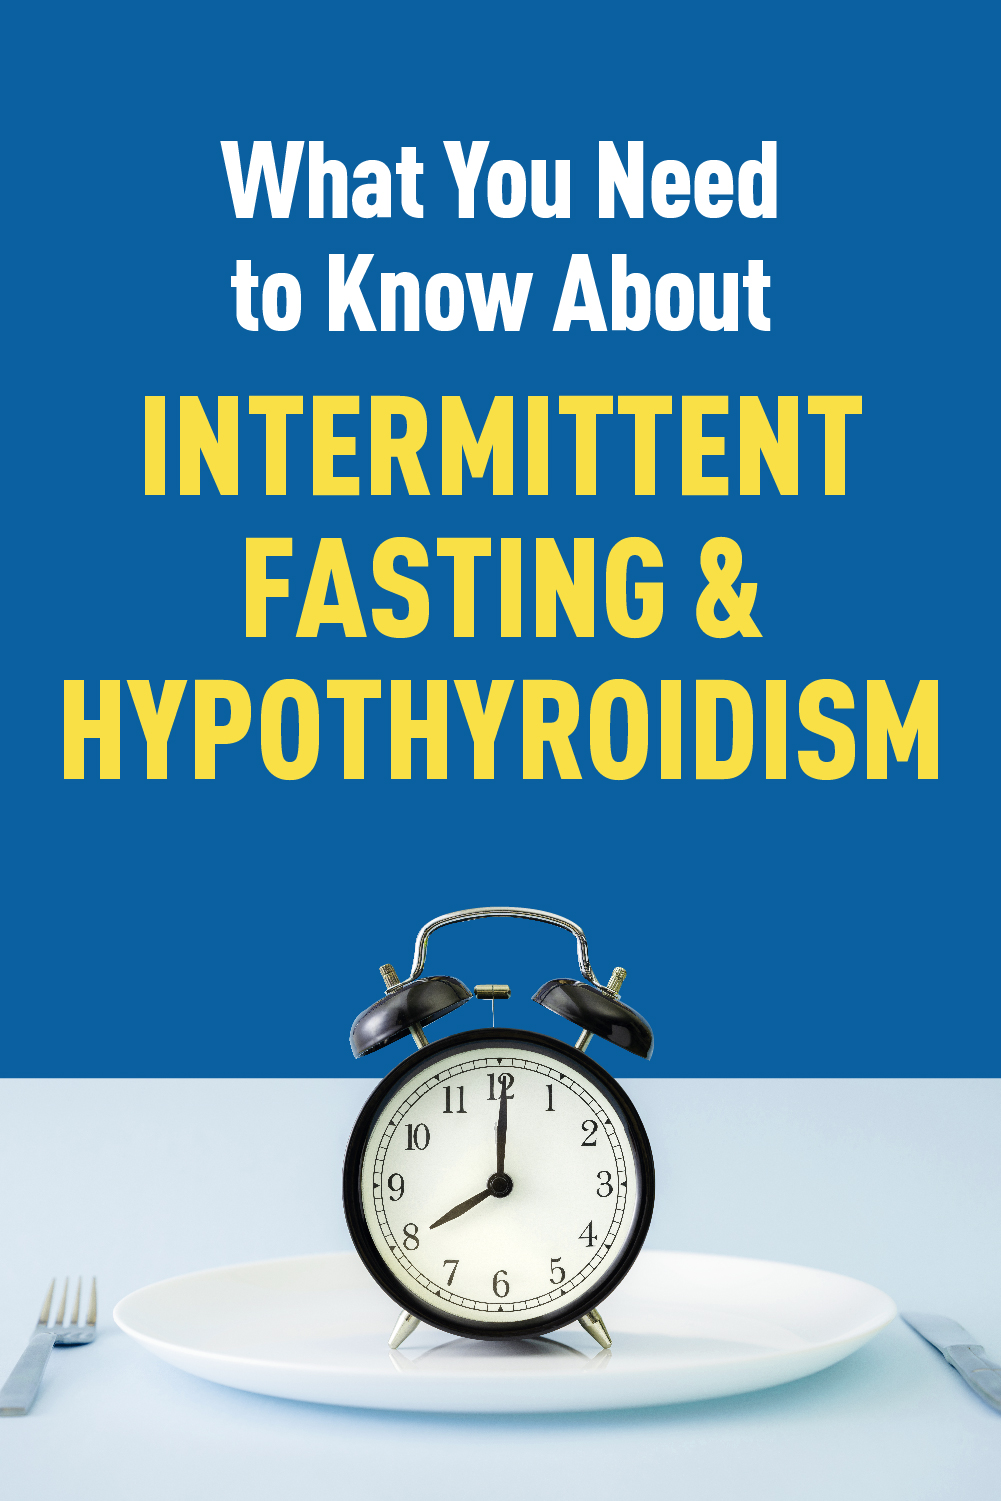 Woman with Hypothyroidism Preparing Food for Intermittent Fasting